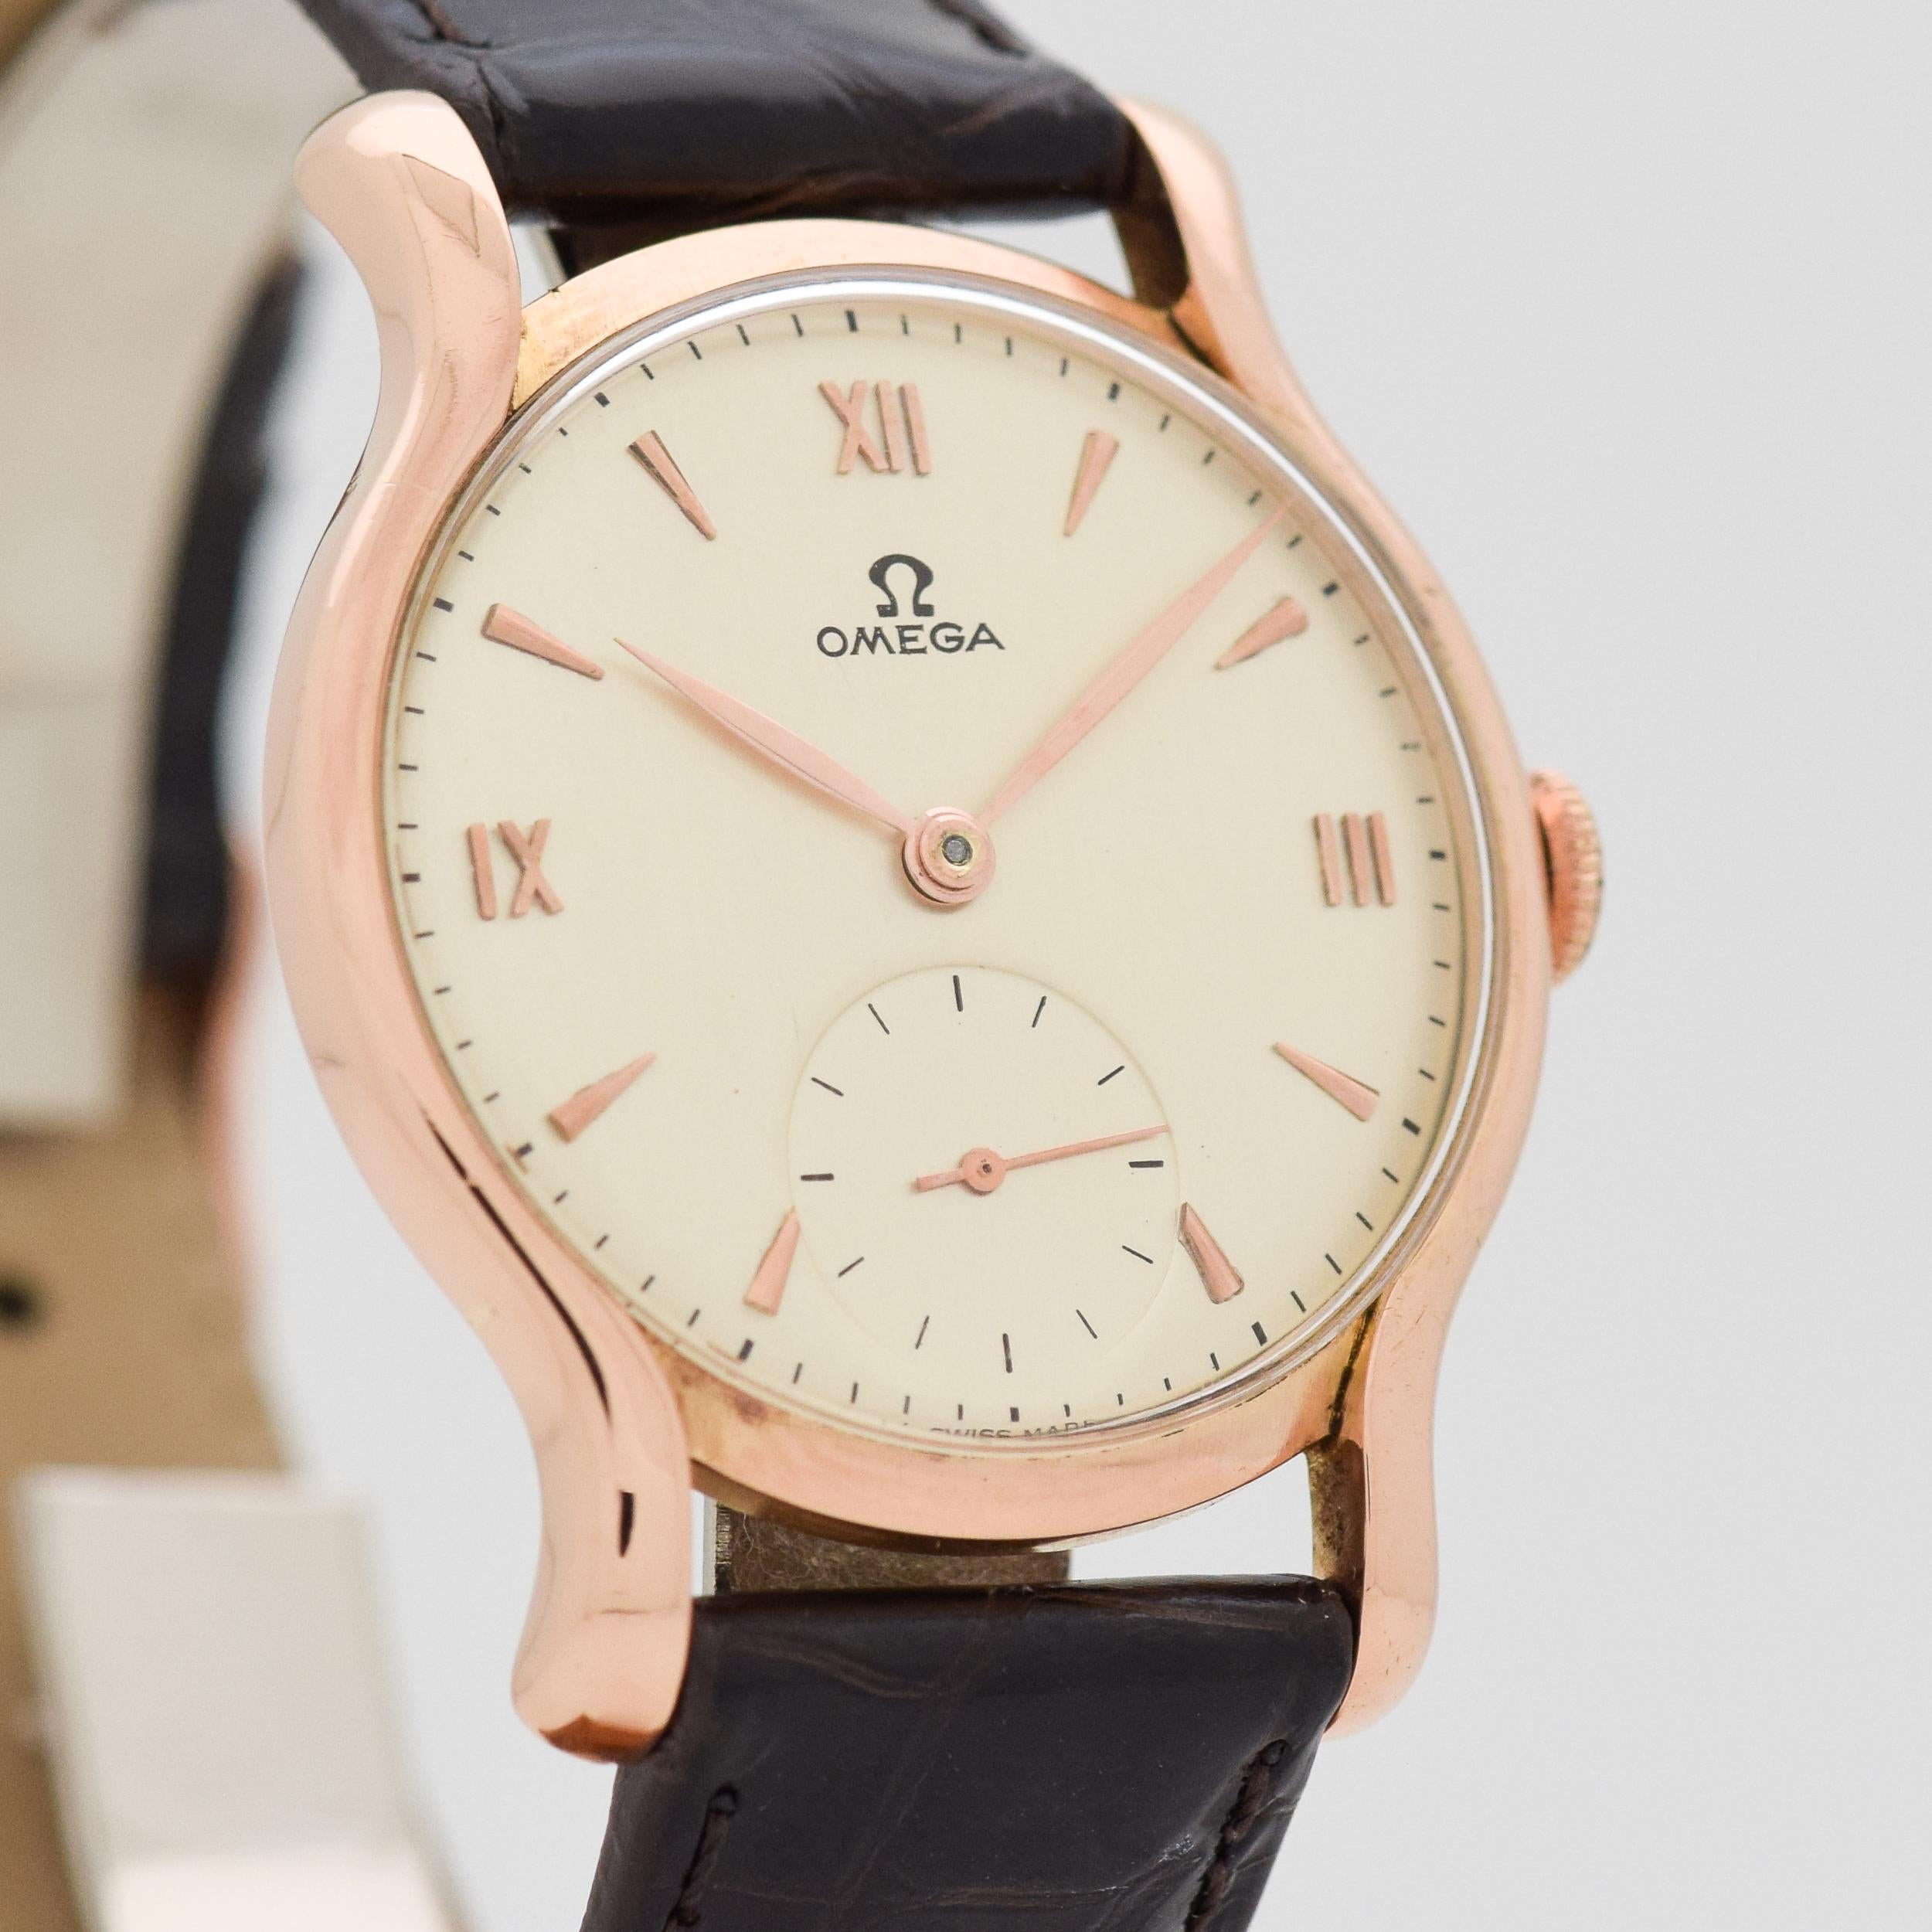 1944 Vintage Omega 18k Rose Gold watch with Silver Dial with Applied Rose Roman Numerals III, IX, and XII with Elongated Triangle Markers. 33mm x 41mm lug to lug (1.3 in. x 1.61 in.) - 17 jewel, manual caliber movement. Equipped with a 100% Genuine